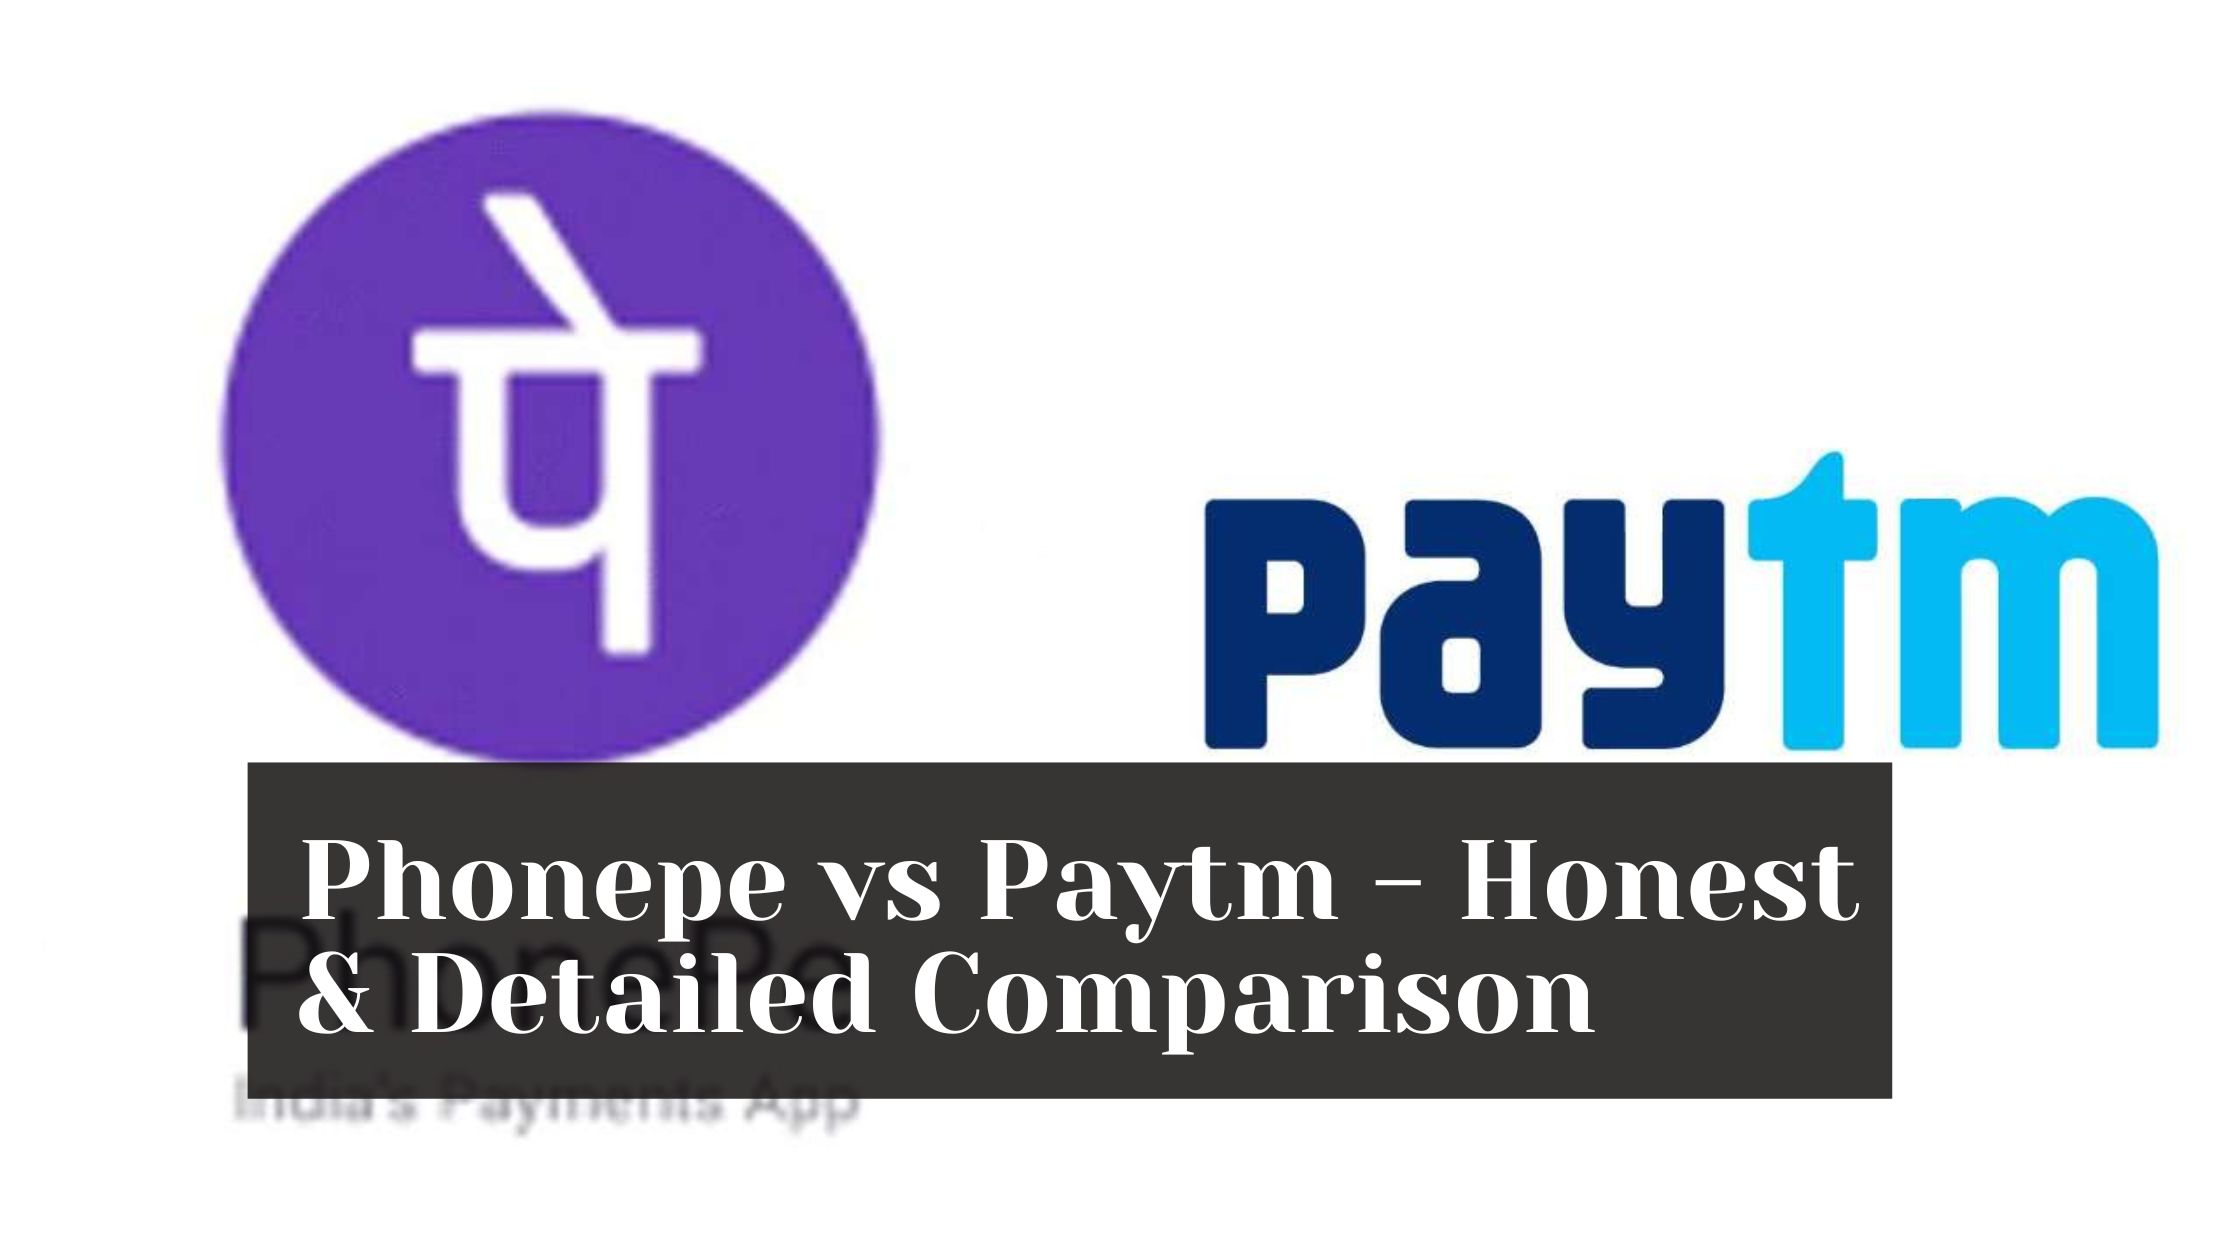 PhonePe Could Be India's Most-Valued Fintech & Next Decacorn If Successful  At Current Fund Raise Talks | India.com